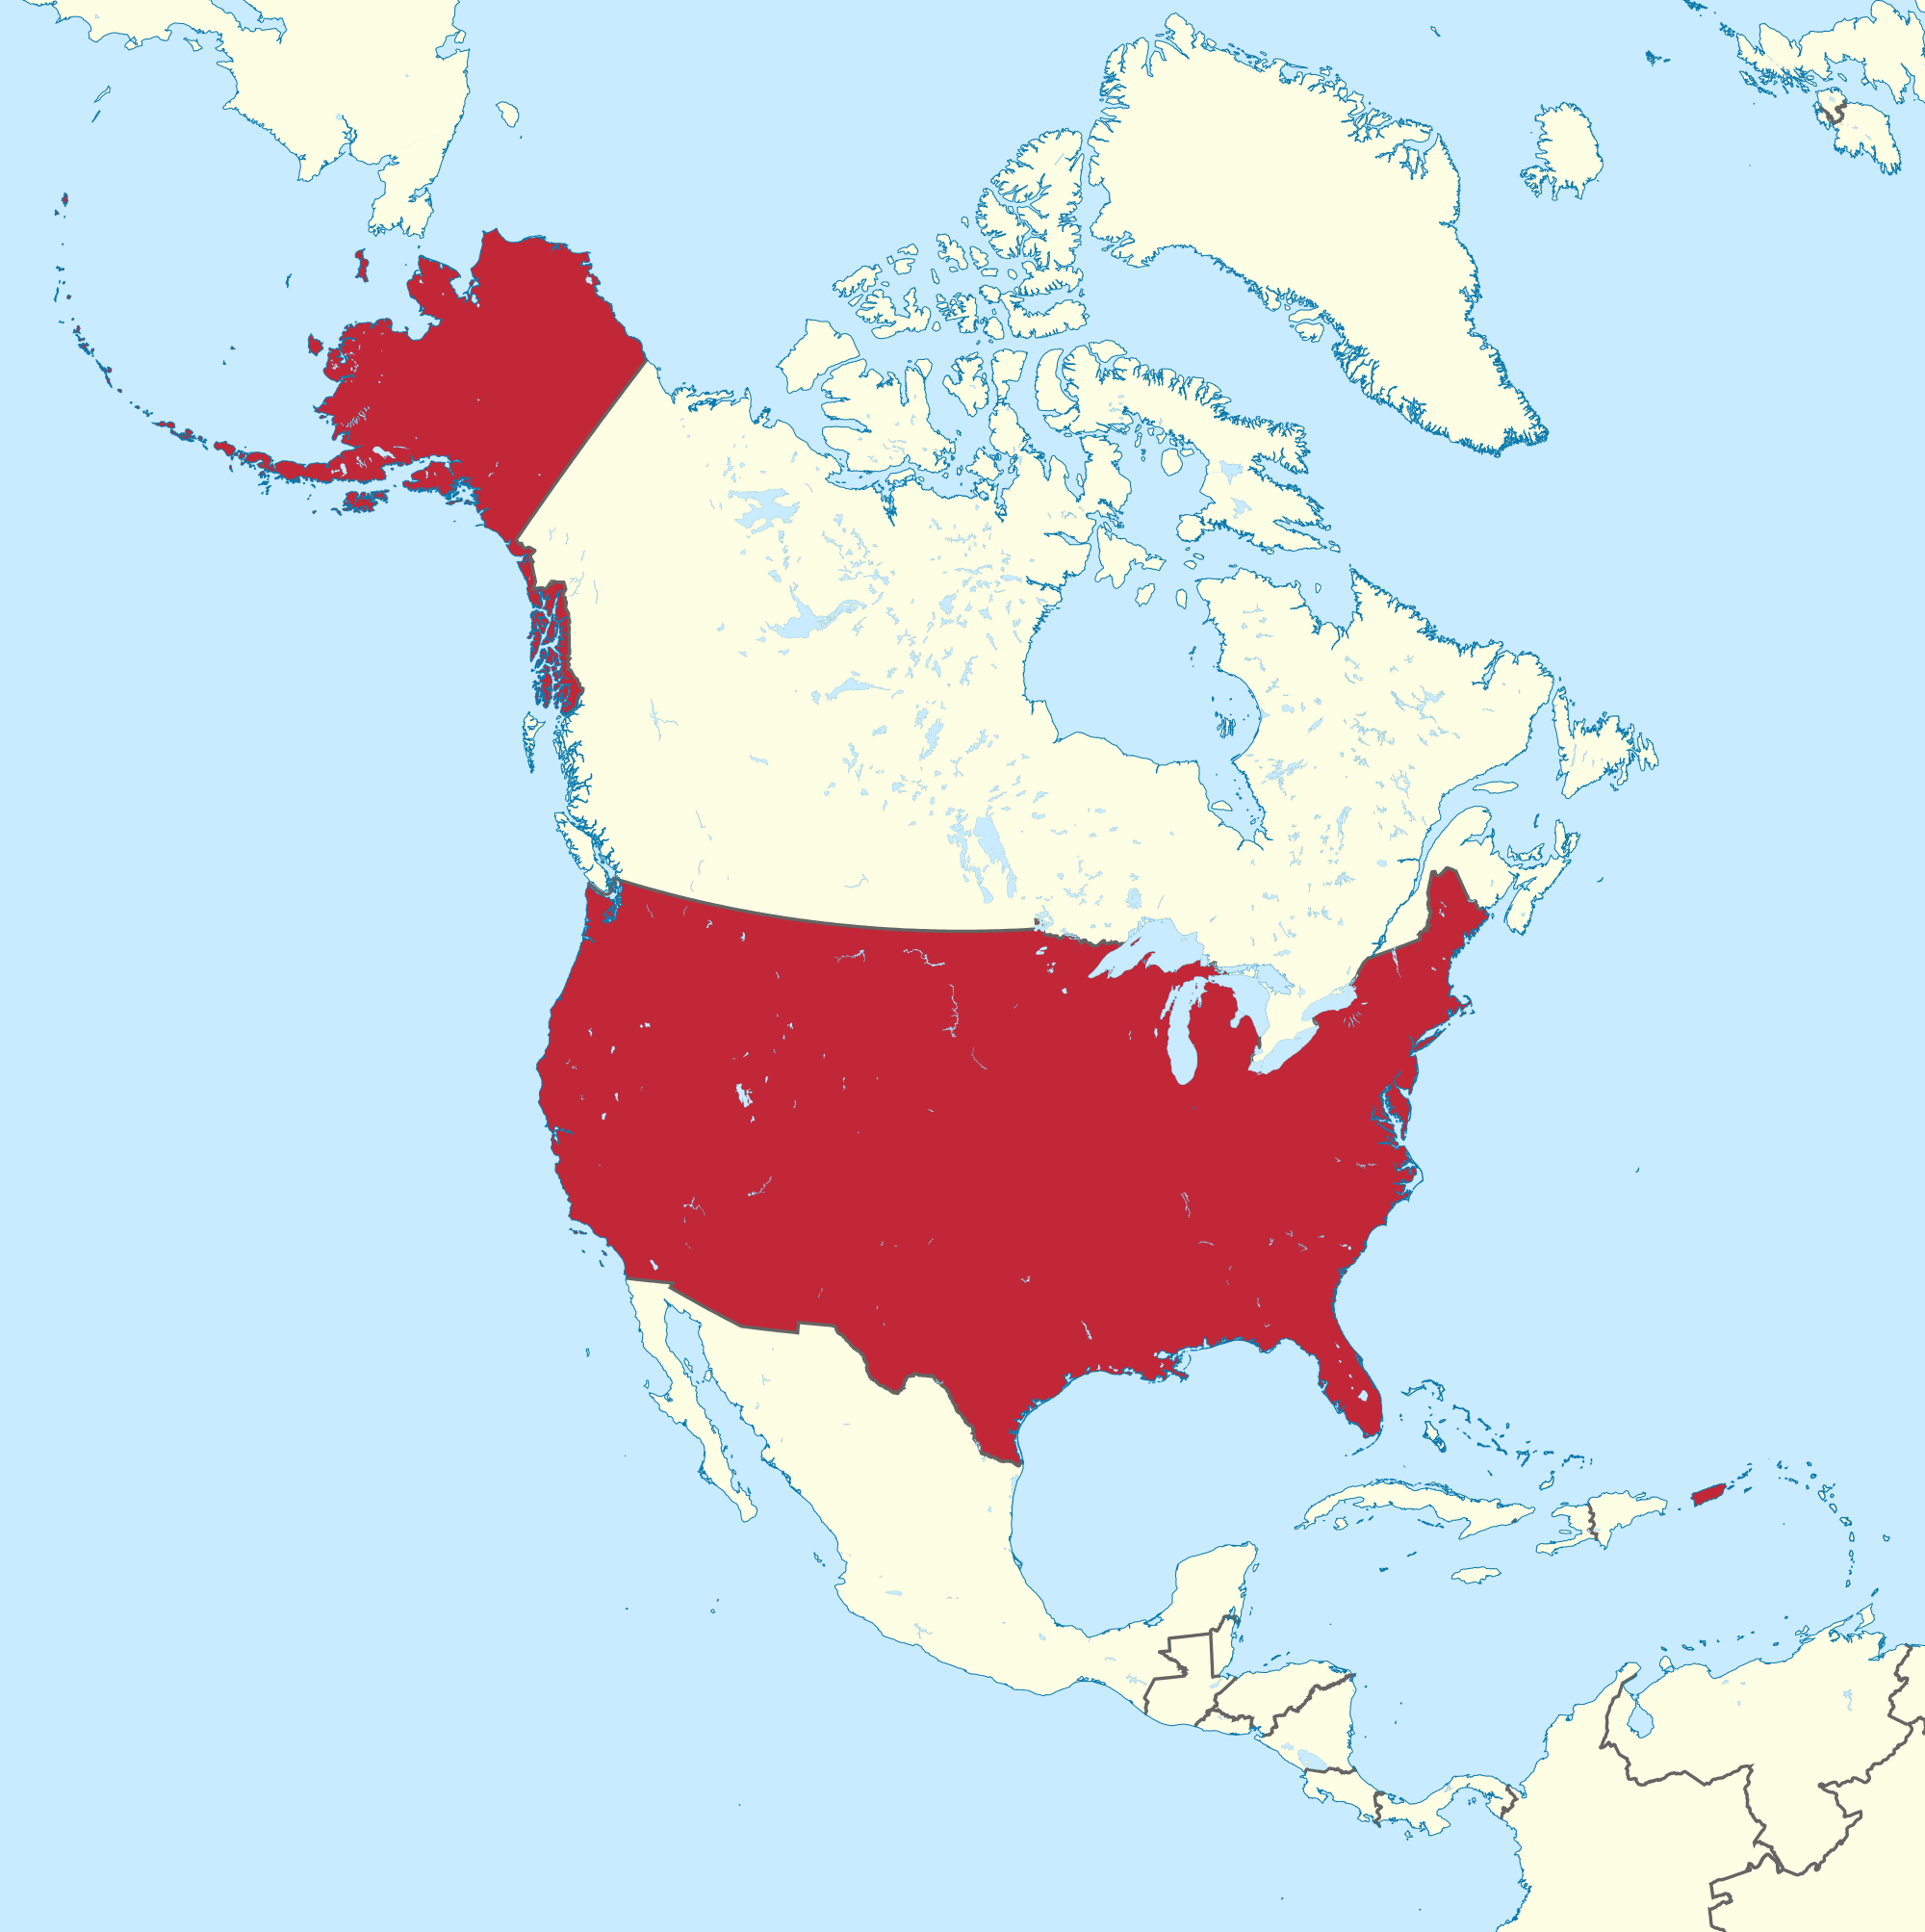 2000px-United_States_in_North_America_(+territories)_(-mini_map_-rivers).svg.png